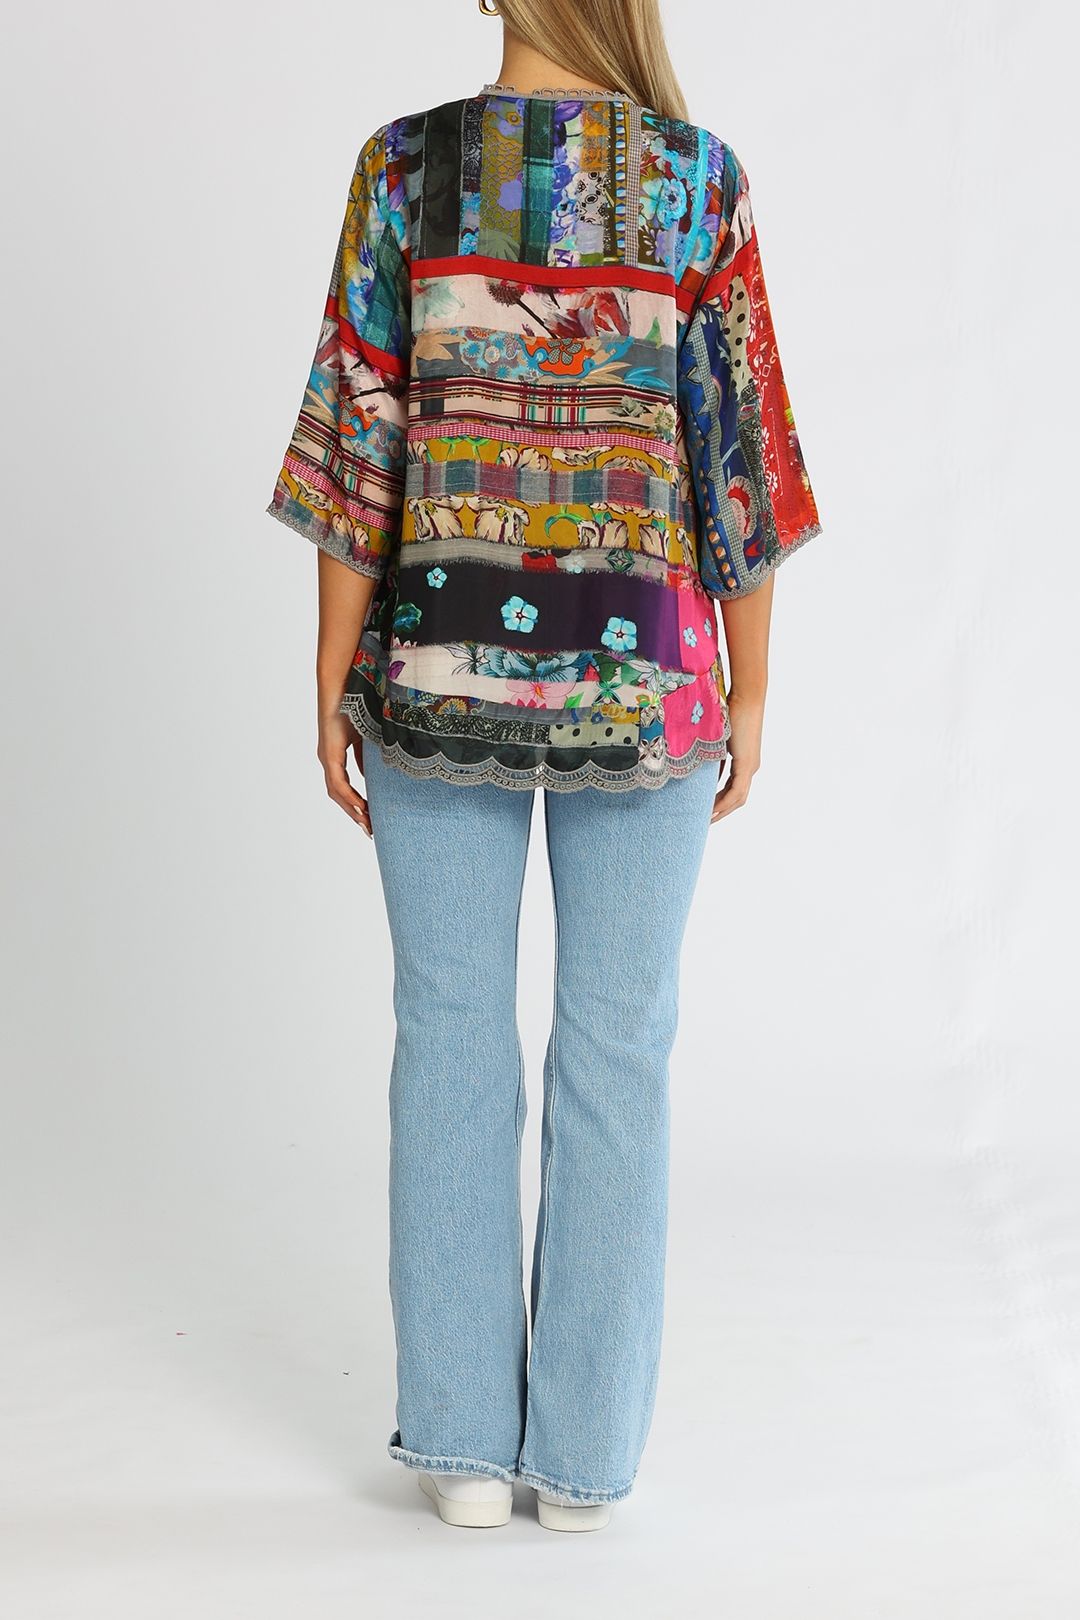 Johnny Was Sonnet Leonora Tunic Multi Relaxed Fit